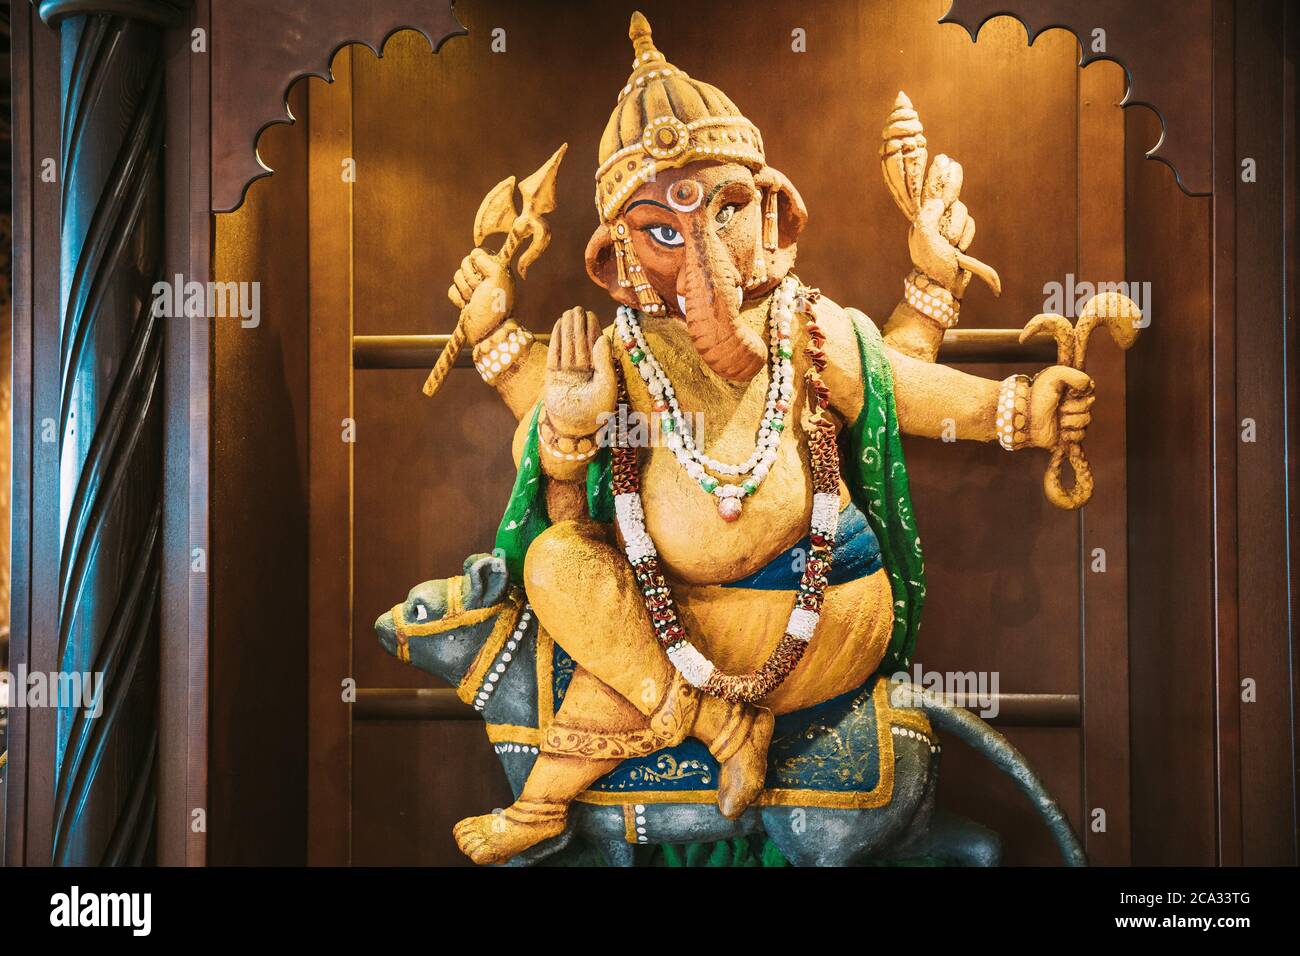 Statue Of Ganesha Also Known As Ganapati And Vinayaka, Is One Of Best-known Deities In Hindu Pantheon. Stock Photo